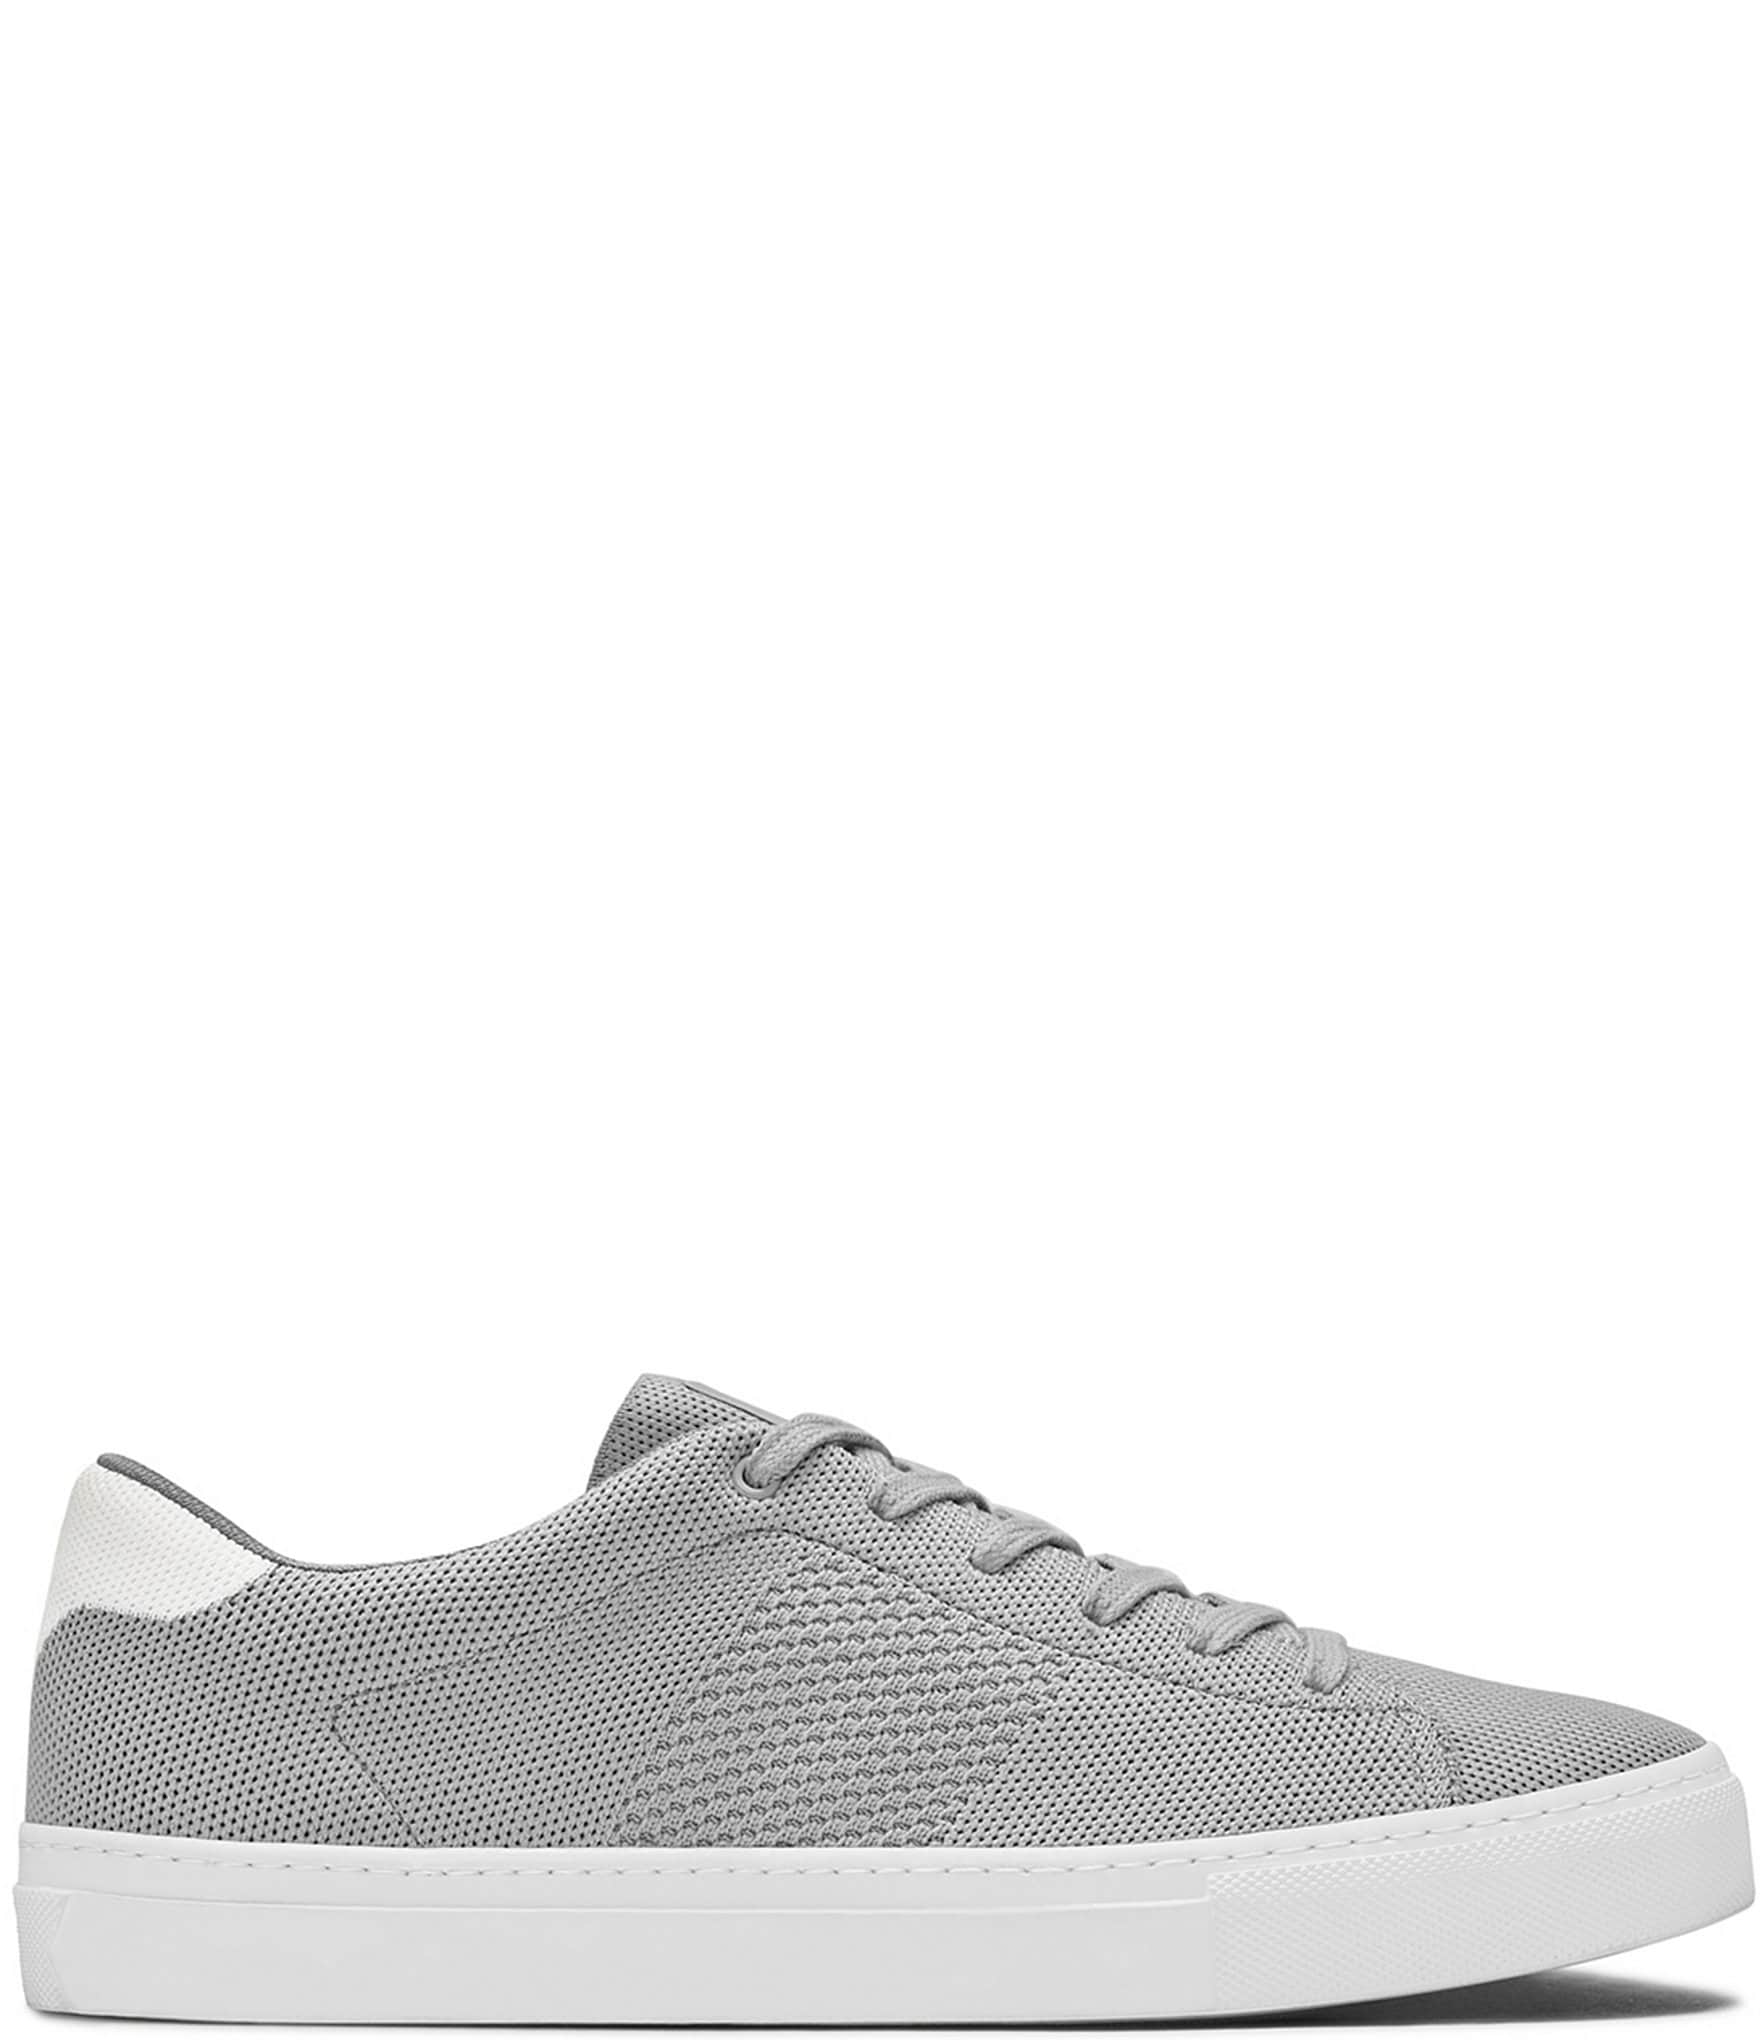 mens white knit sneakers